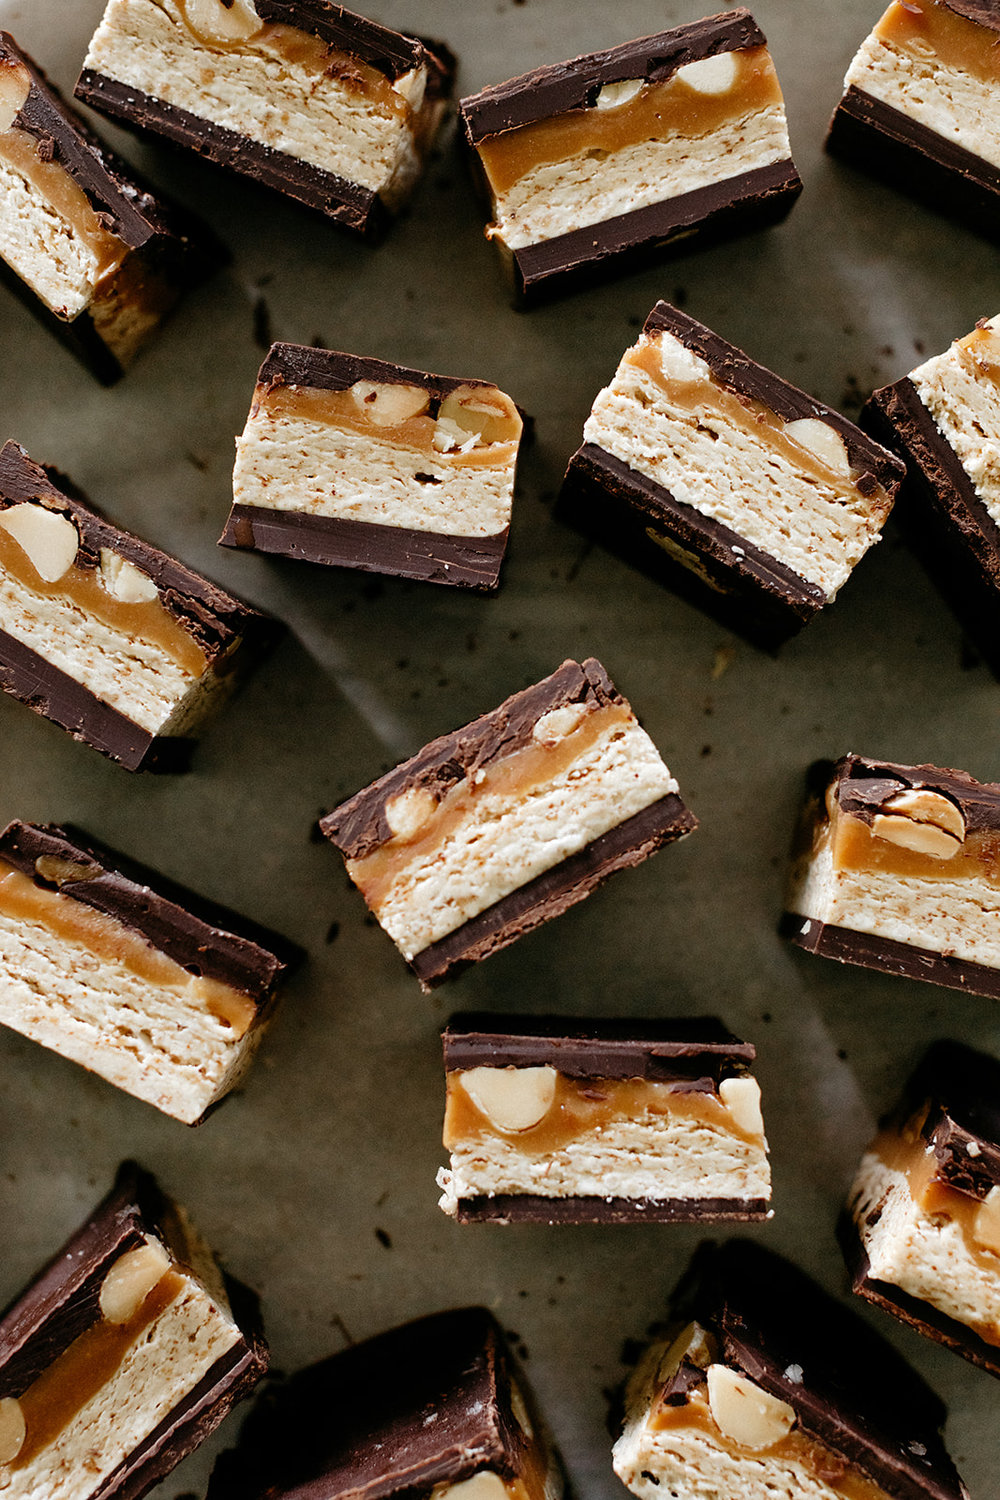 7-19-19-molly-yeh-homemade-snickers-3.jpg